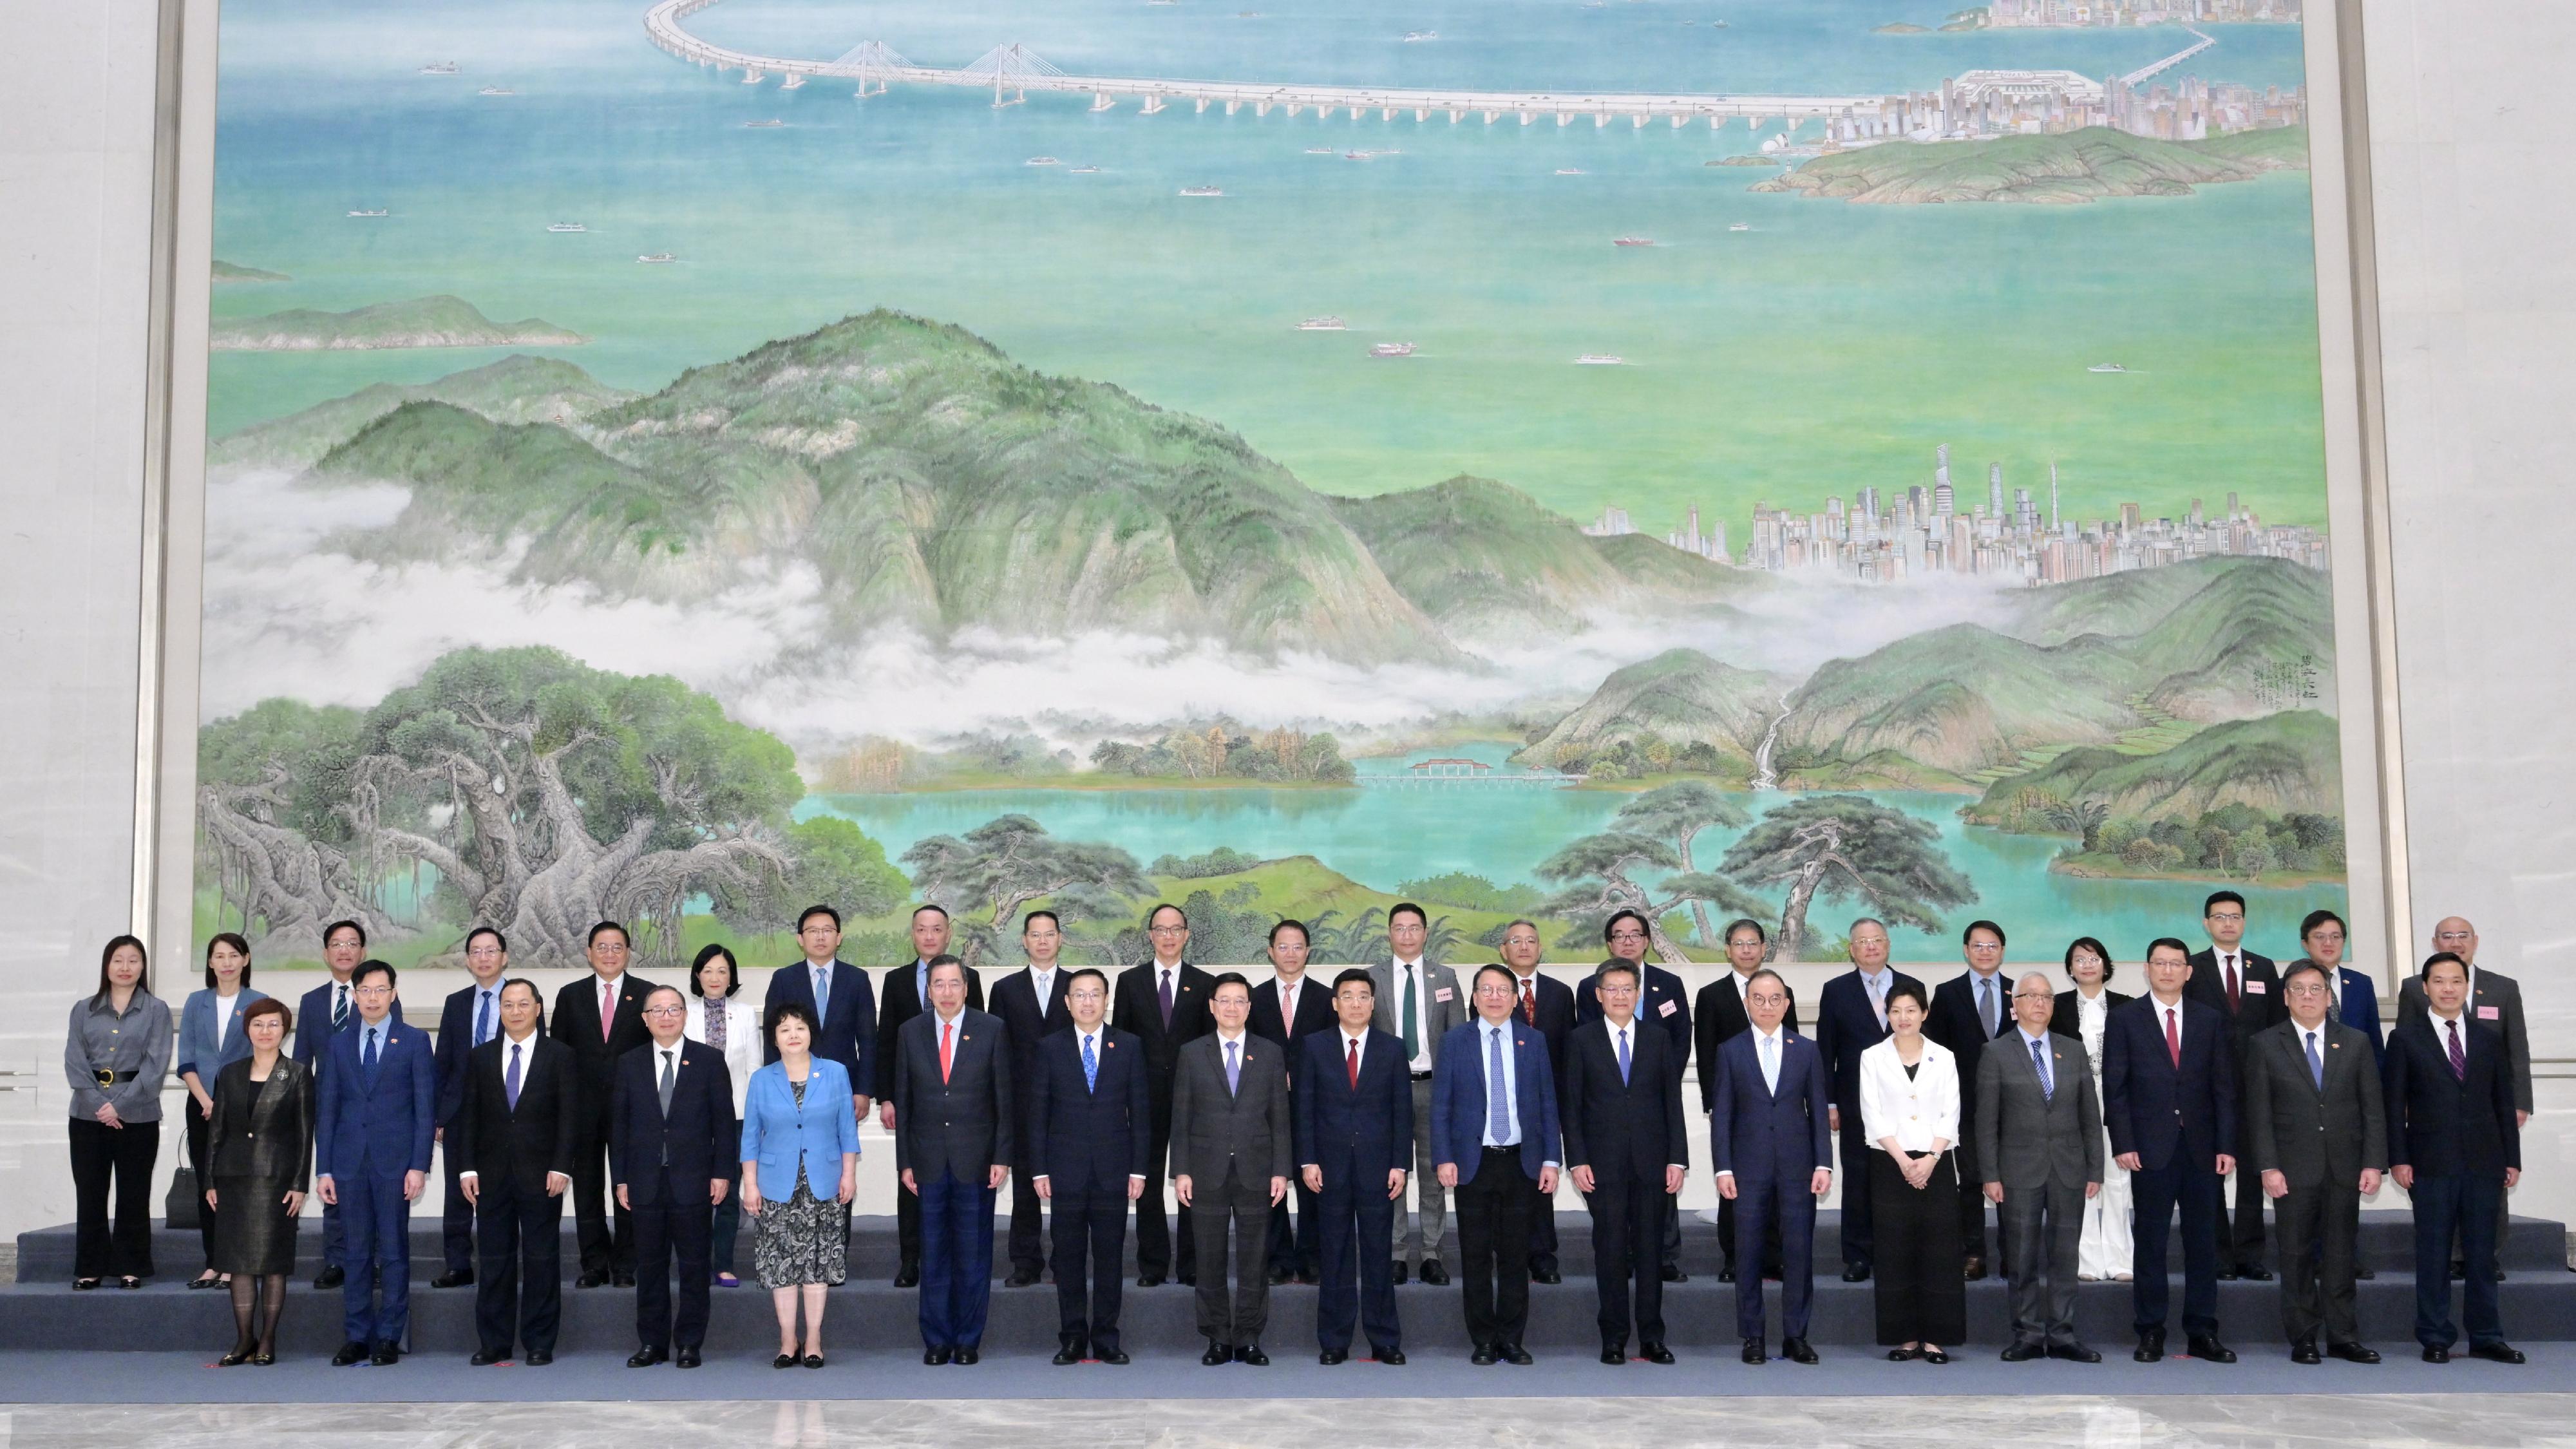 The Chief Executive, Mr John Lee, led a delegation of the Hong Kong Special Administrative Region Government and the Legislative Council to visit Guangzhou today (April 24). Photo shows Mr Lee (front row, eighth left) meeting the Secretary of the CPC Guangzhou Municipal Committee, Mr Lin Keqing  (front row, ninth left); the Mayor of the Guangzhou Municipal Government, Mr Guo Yonghang (front row, seventh right); Deputy Director of the Liaison Office of the Central People's Government in the Hong Kong Special Administrative Region Mr He Jing (front row, seventh left); the Director General of the Hong Kong and Macao Affairs Office of the People's Government of Guangdong Province, Ms Li Huanchun (front row, fifth left); and the members of the delegation before the dinner with leaders of Guangzhou Municipal Government.